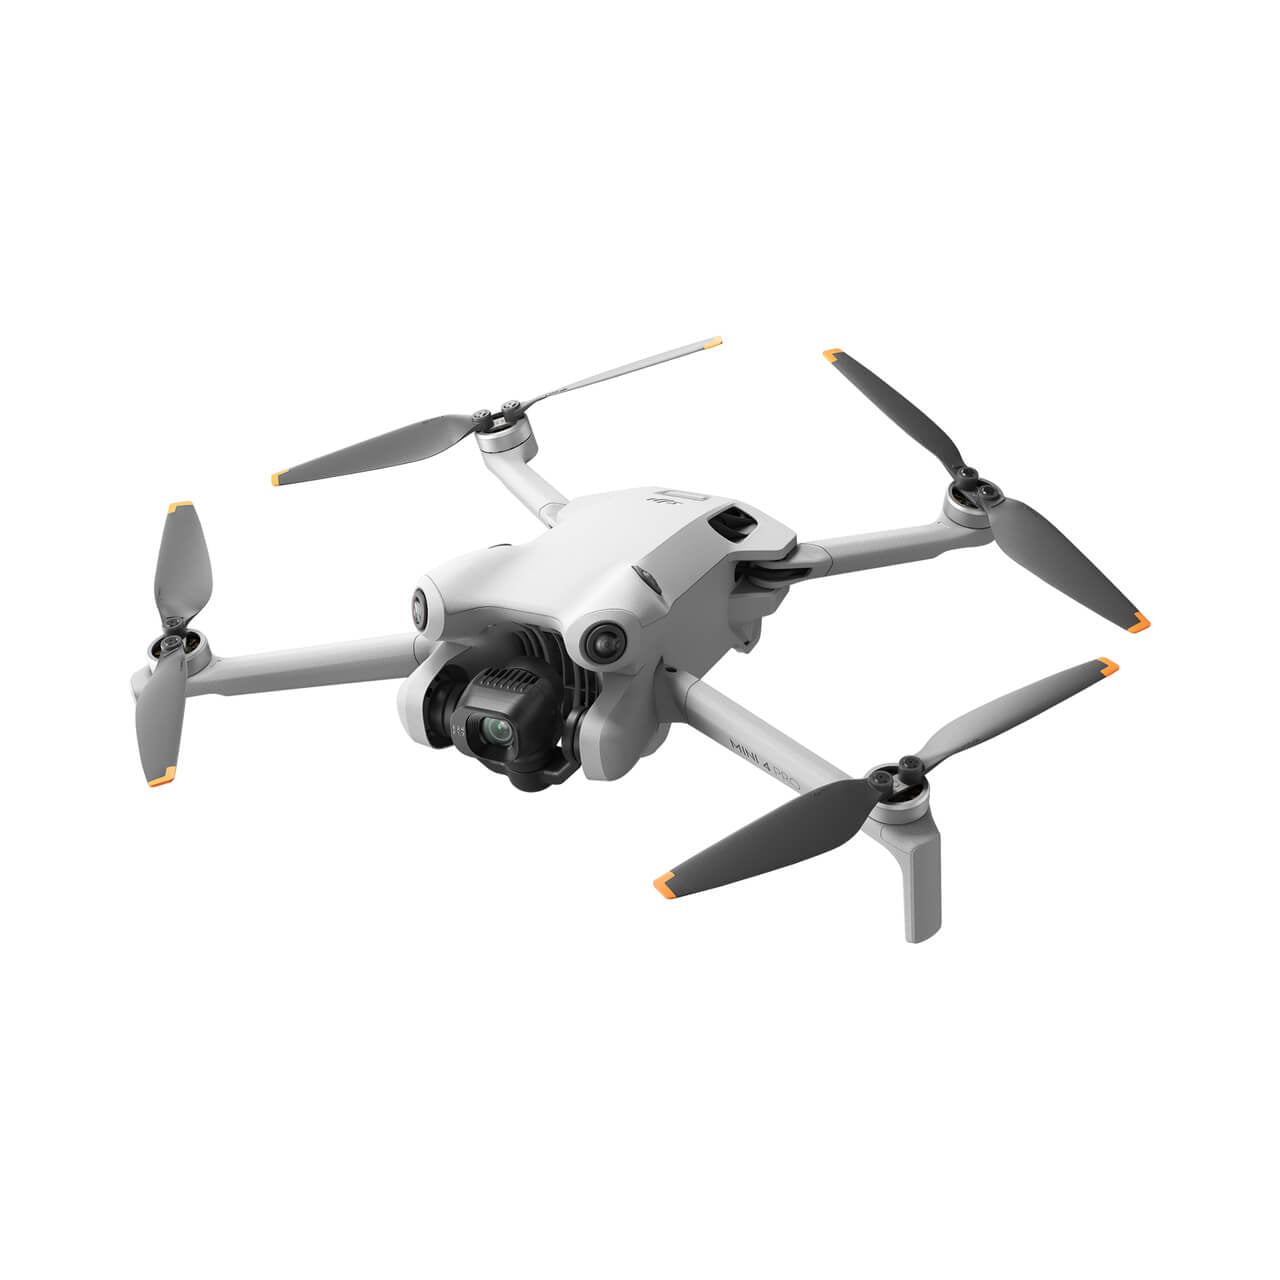  DJI Mini 2 Fly More Combo Quadcopter with Remote